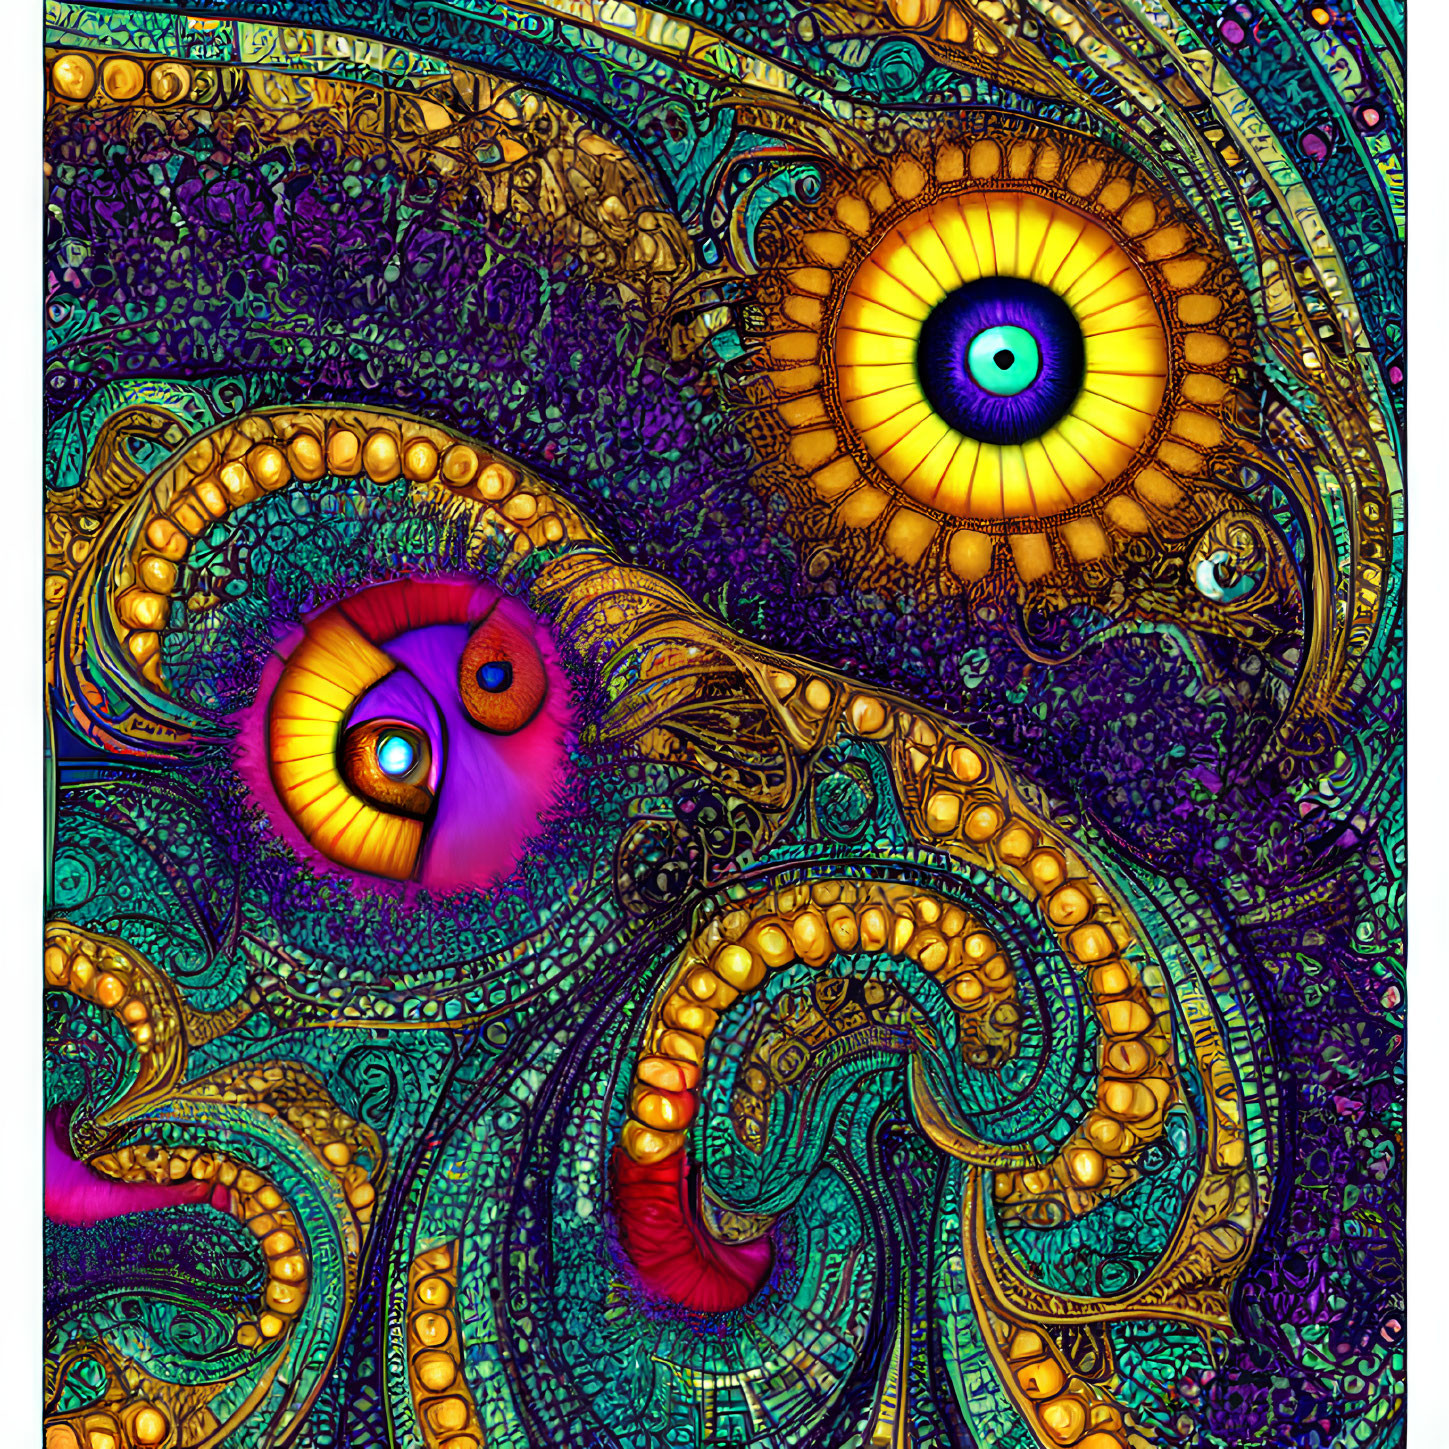 Colorful Psychedelic Artwork with Stylized Eyes and Paisley Motifs